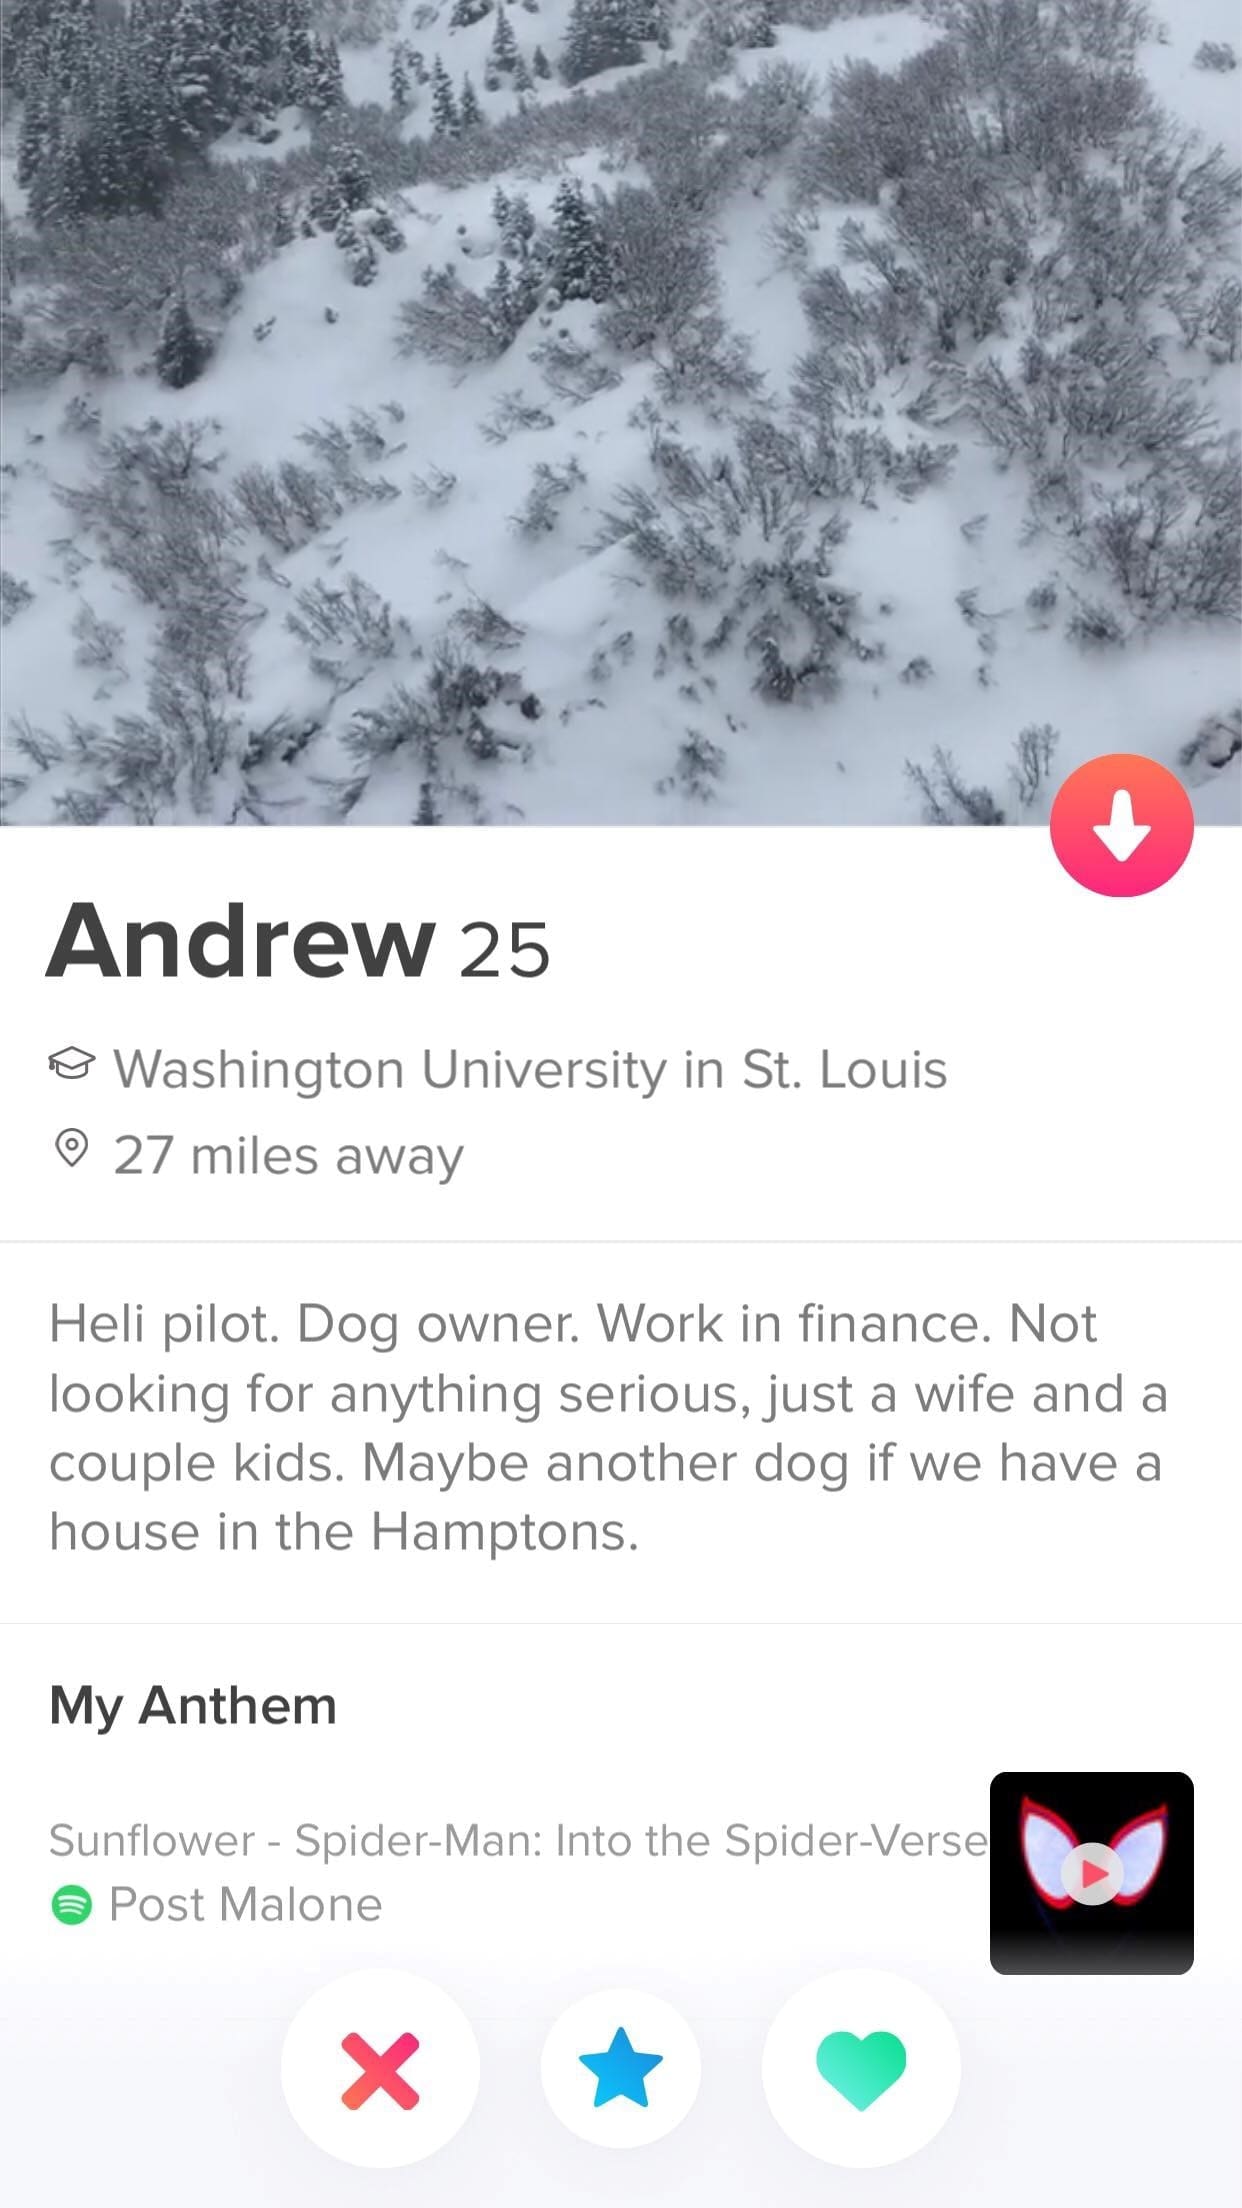 10 Best Tinder Bio Examples for Guys (To Make Her Swipe Right)